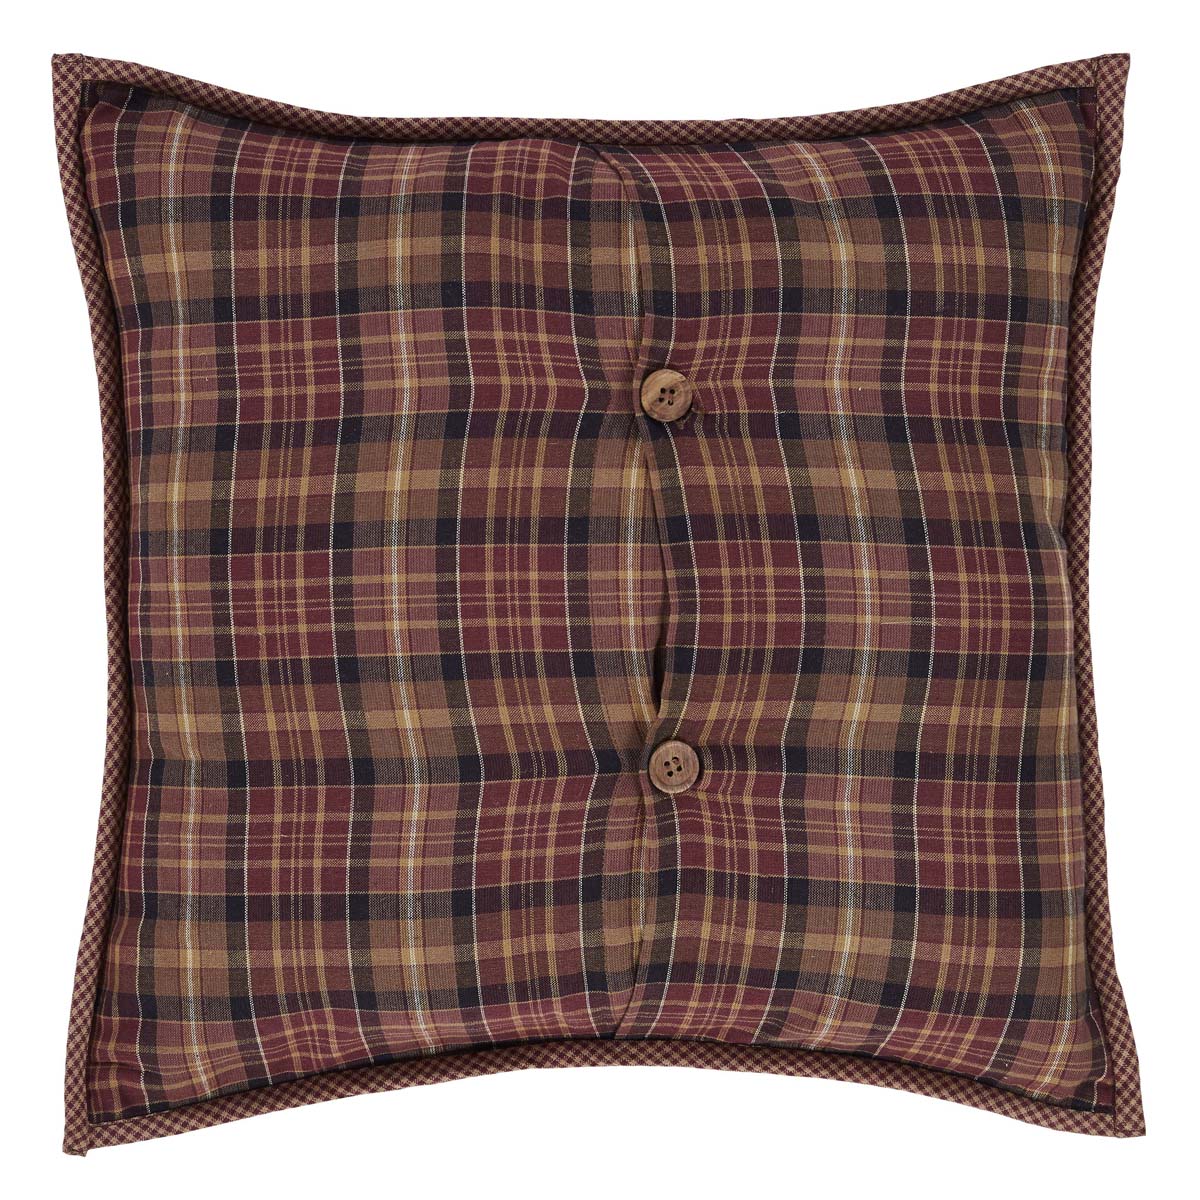 Primitive Throw Pillow 16x16 Abilene Star Quilted Patchwork Red Brown Americana VHC Brands